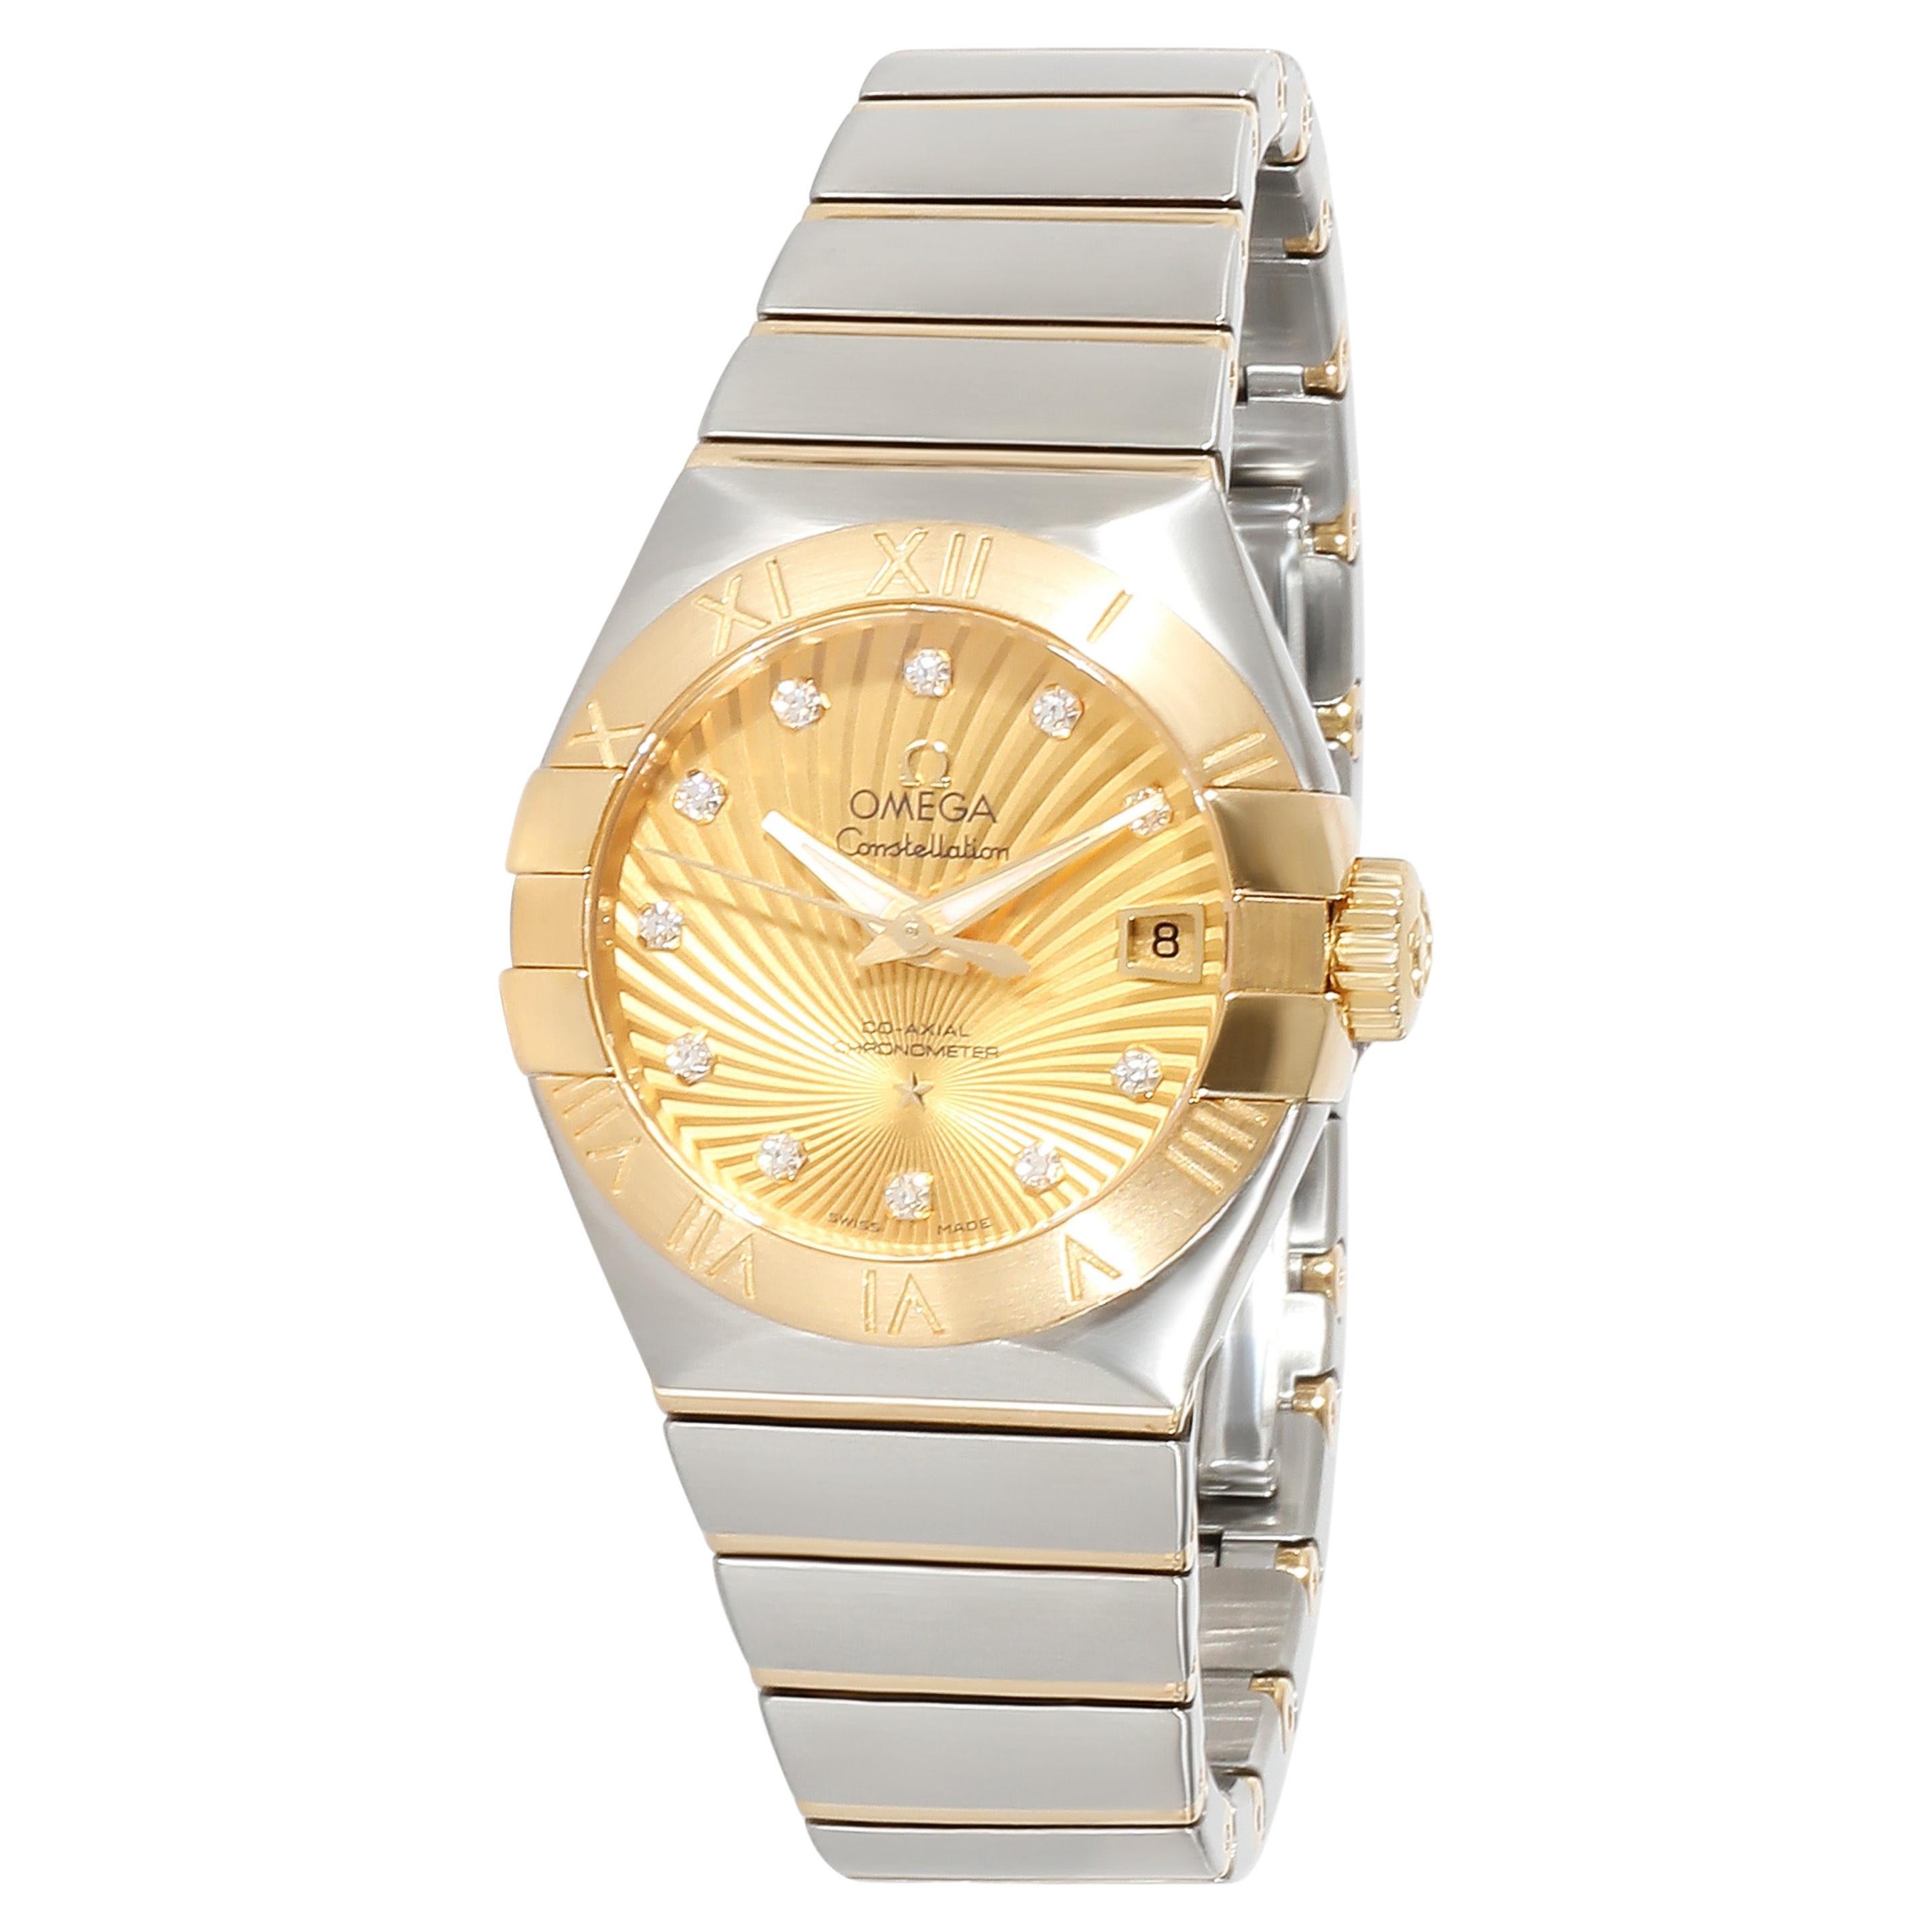 Omega Constellation 123.20.27.20.58.001 Women's Watch in 18k Stainless Steel/Yel For Sale